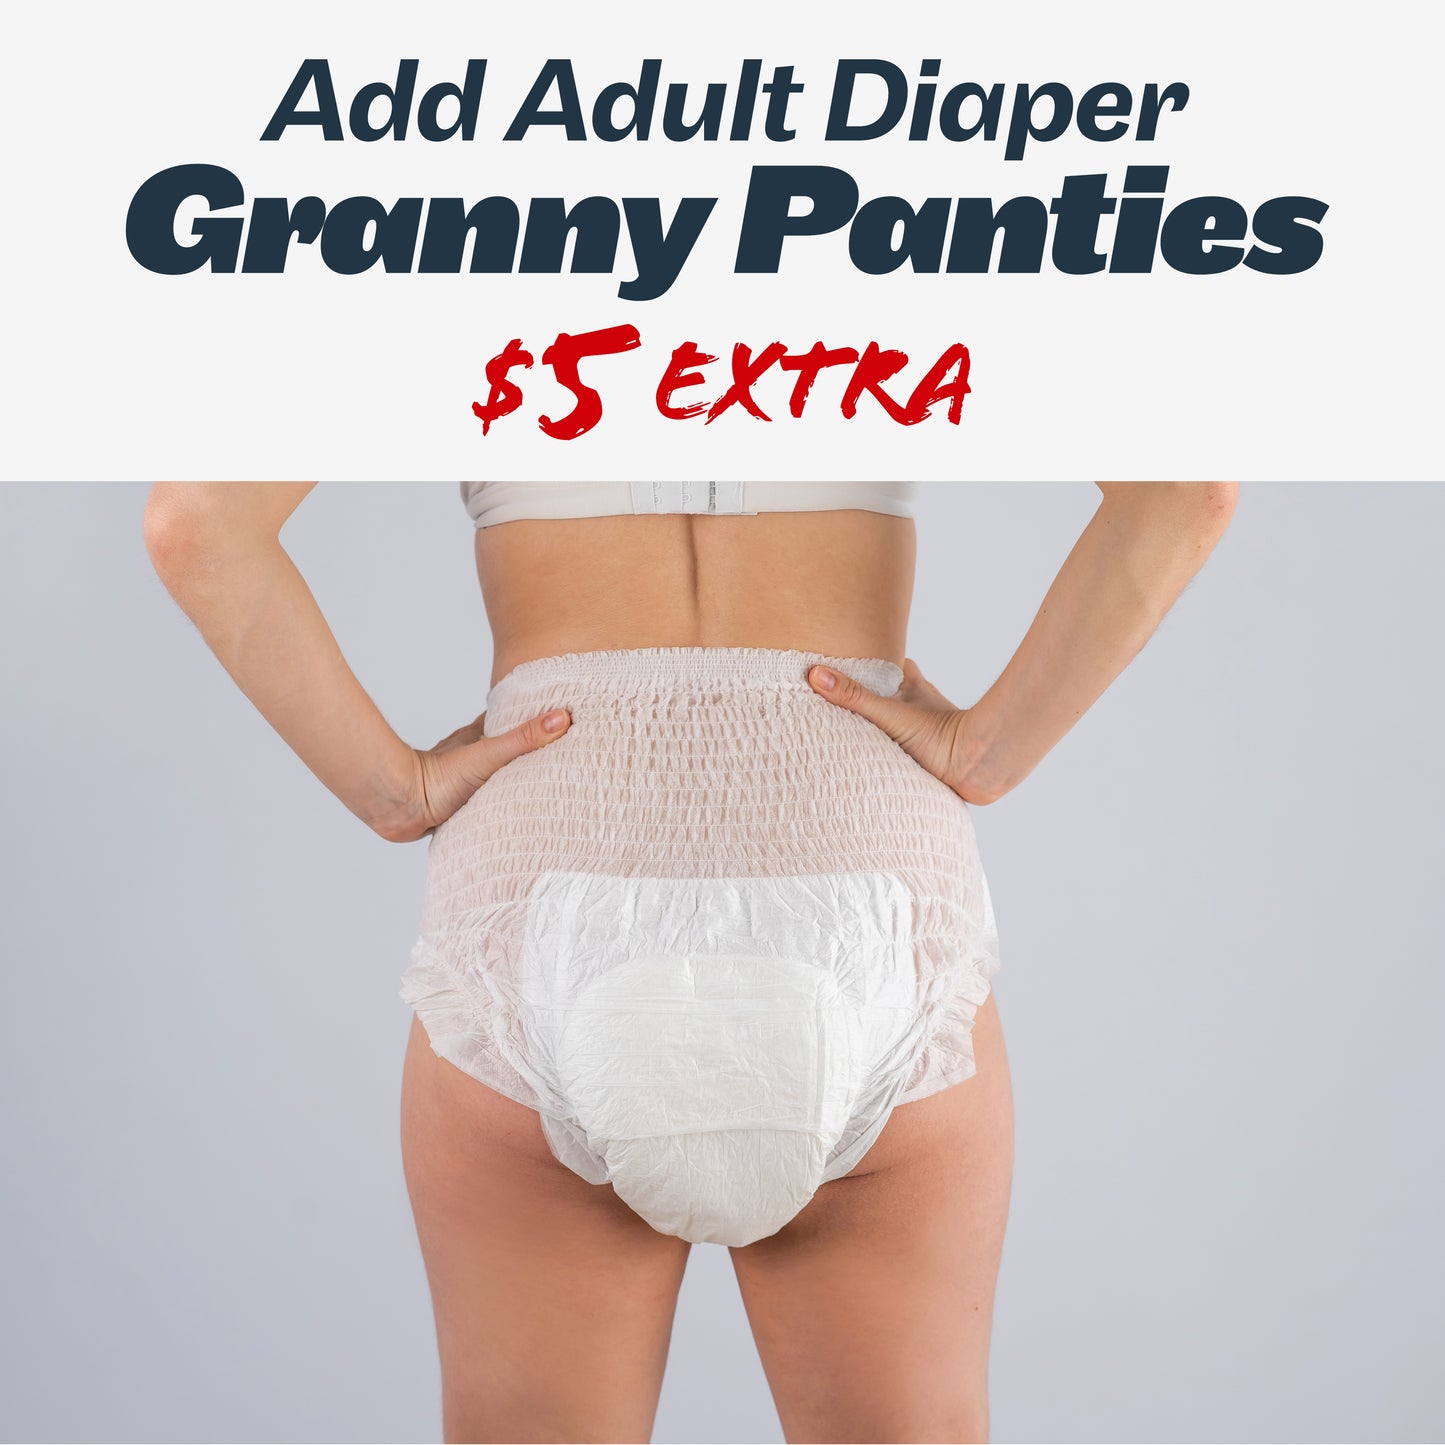 Add REAL adult diaper granny panties to your prank package for only $5 extra!